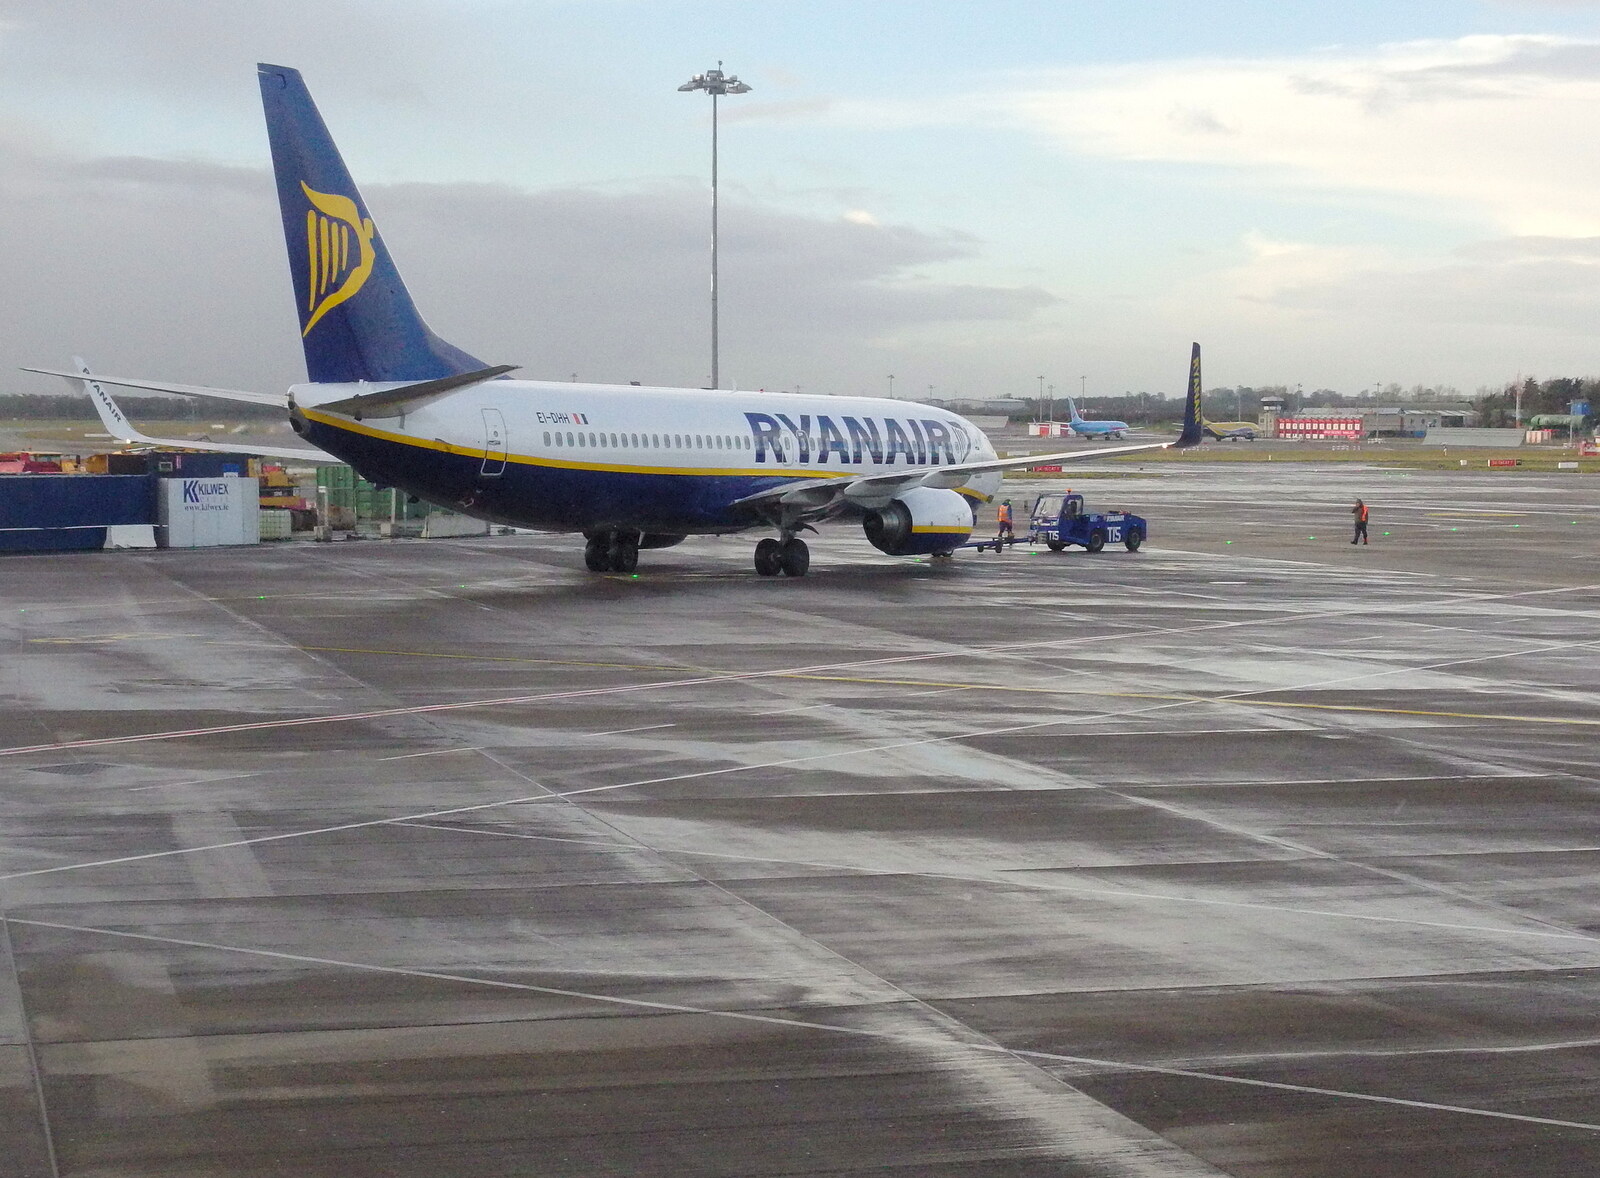 Another Ruinair 737 taxis off from Dun Laoghaire and an Electrical Disaster, Monkstown, County Dublin, Ireland - 4th January 2014